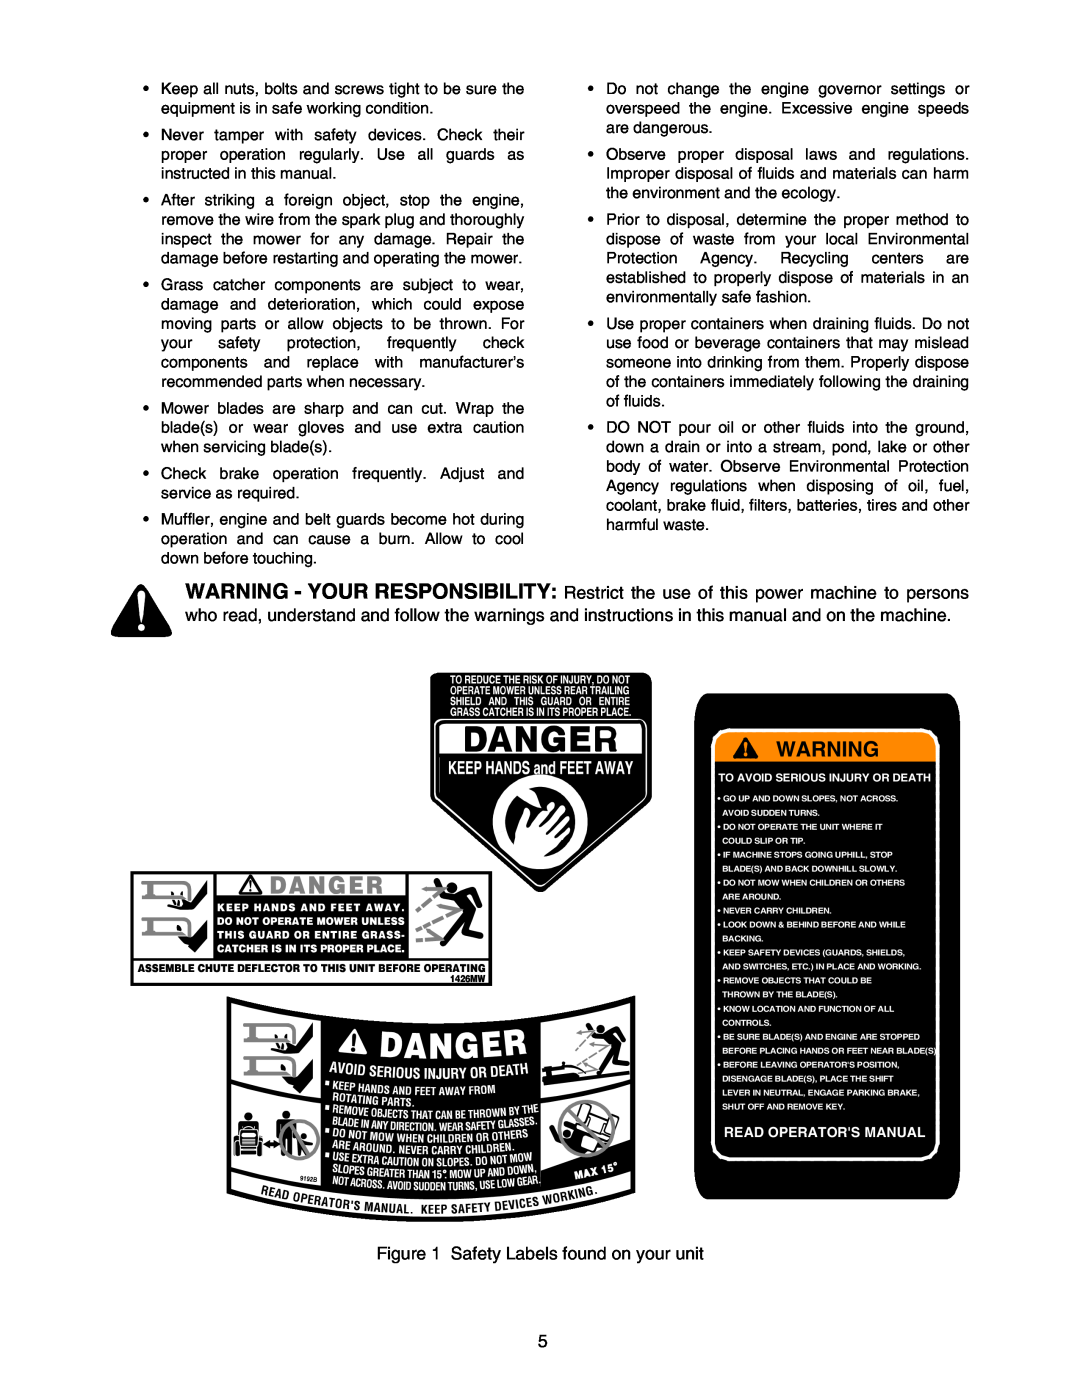 MTD 604 manual Safety Labels found on your unit 